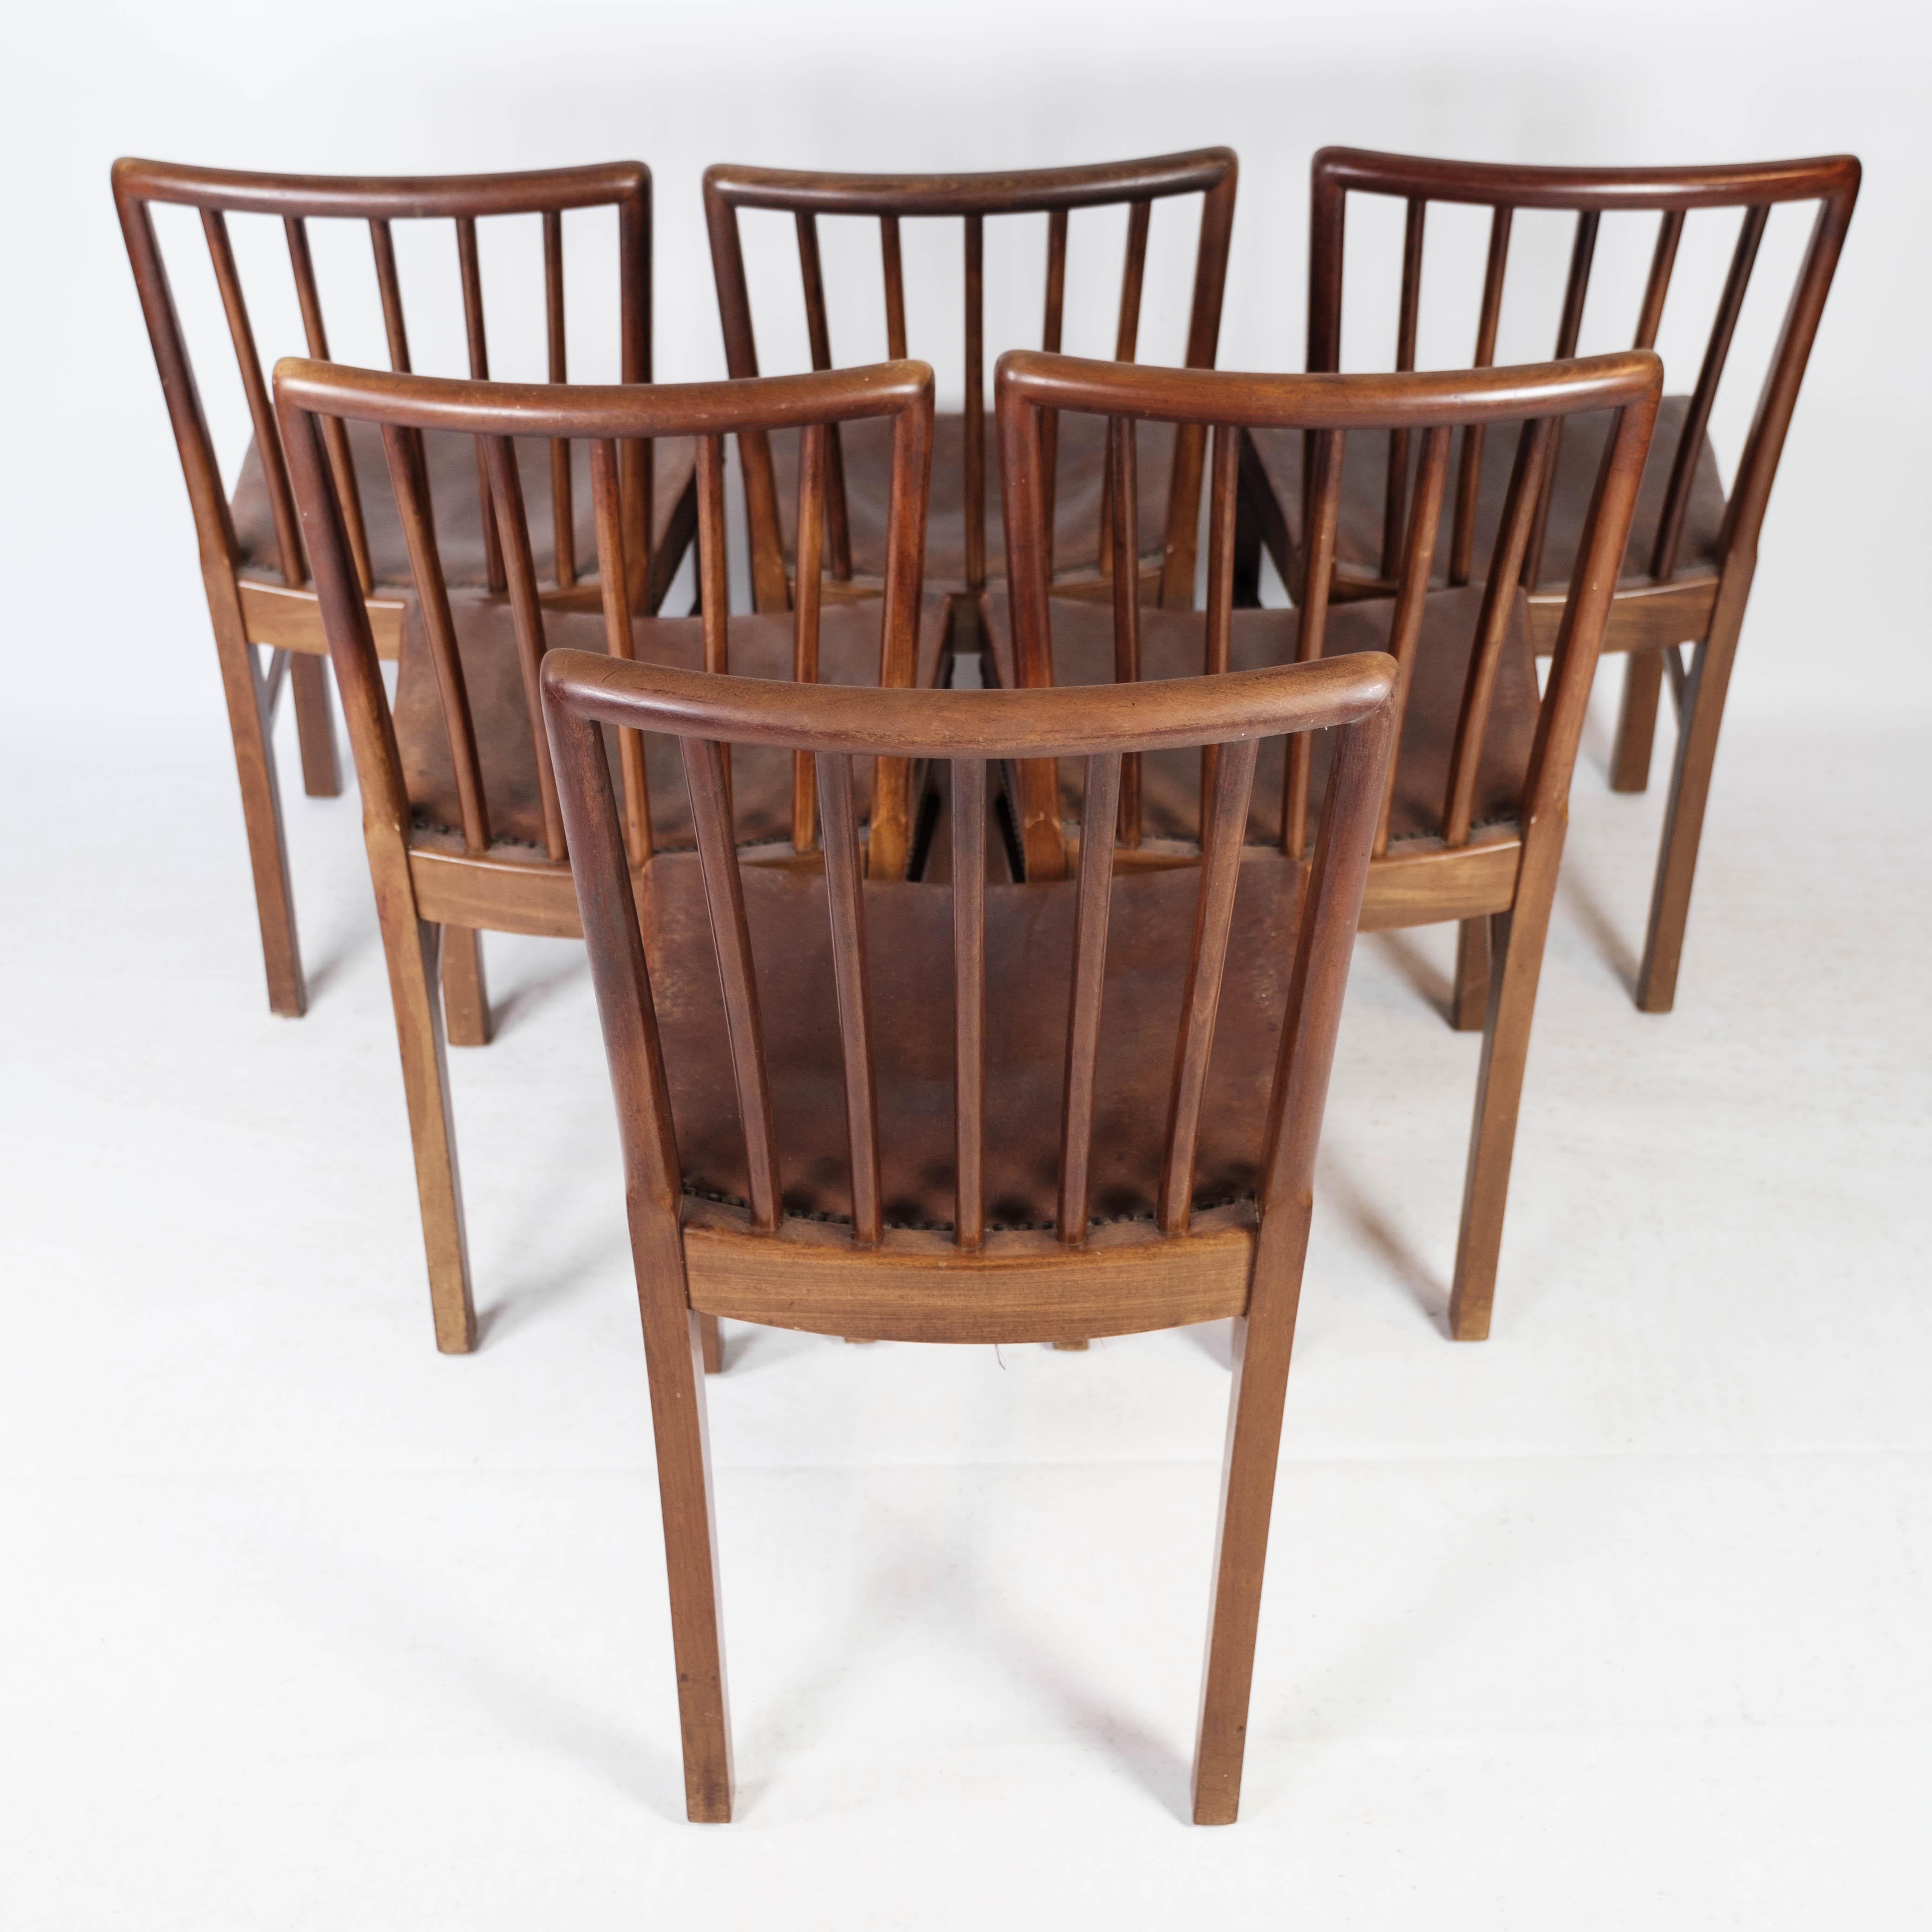 Mid-20th Century Set of Six Dining Room Chairs of Mahogany by Fritz Hansen, 1940s